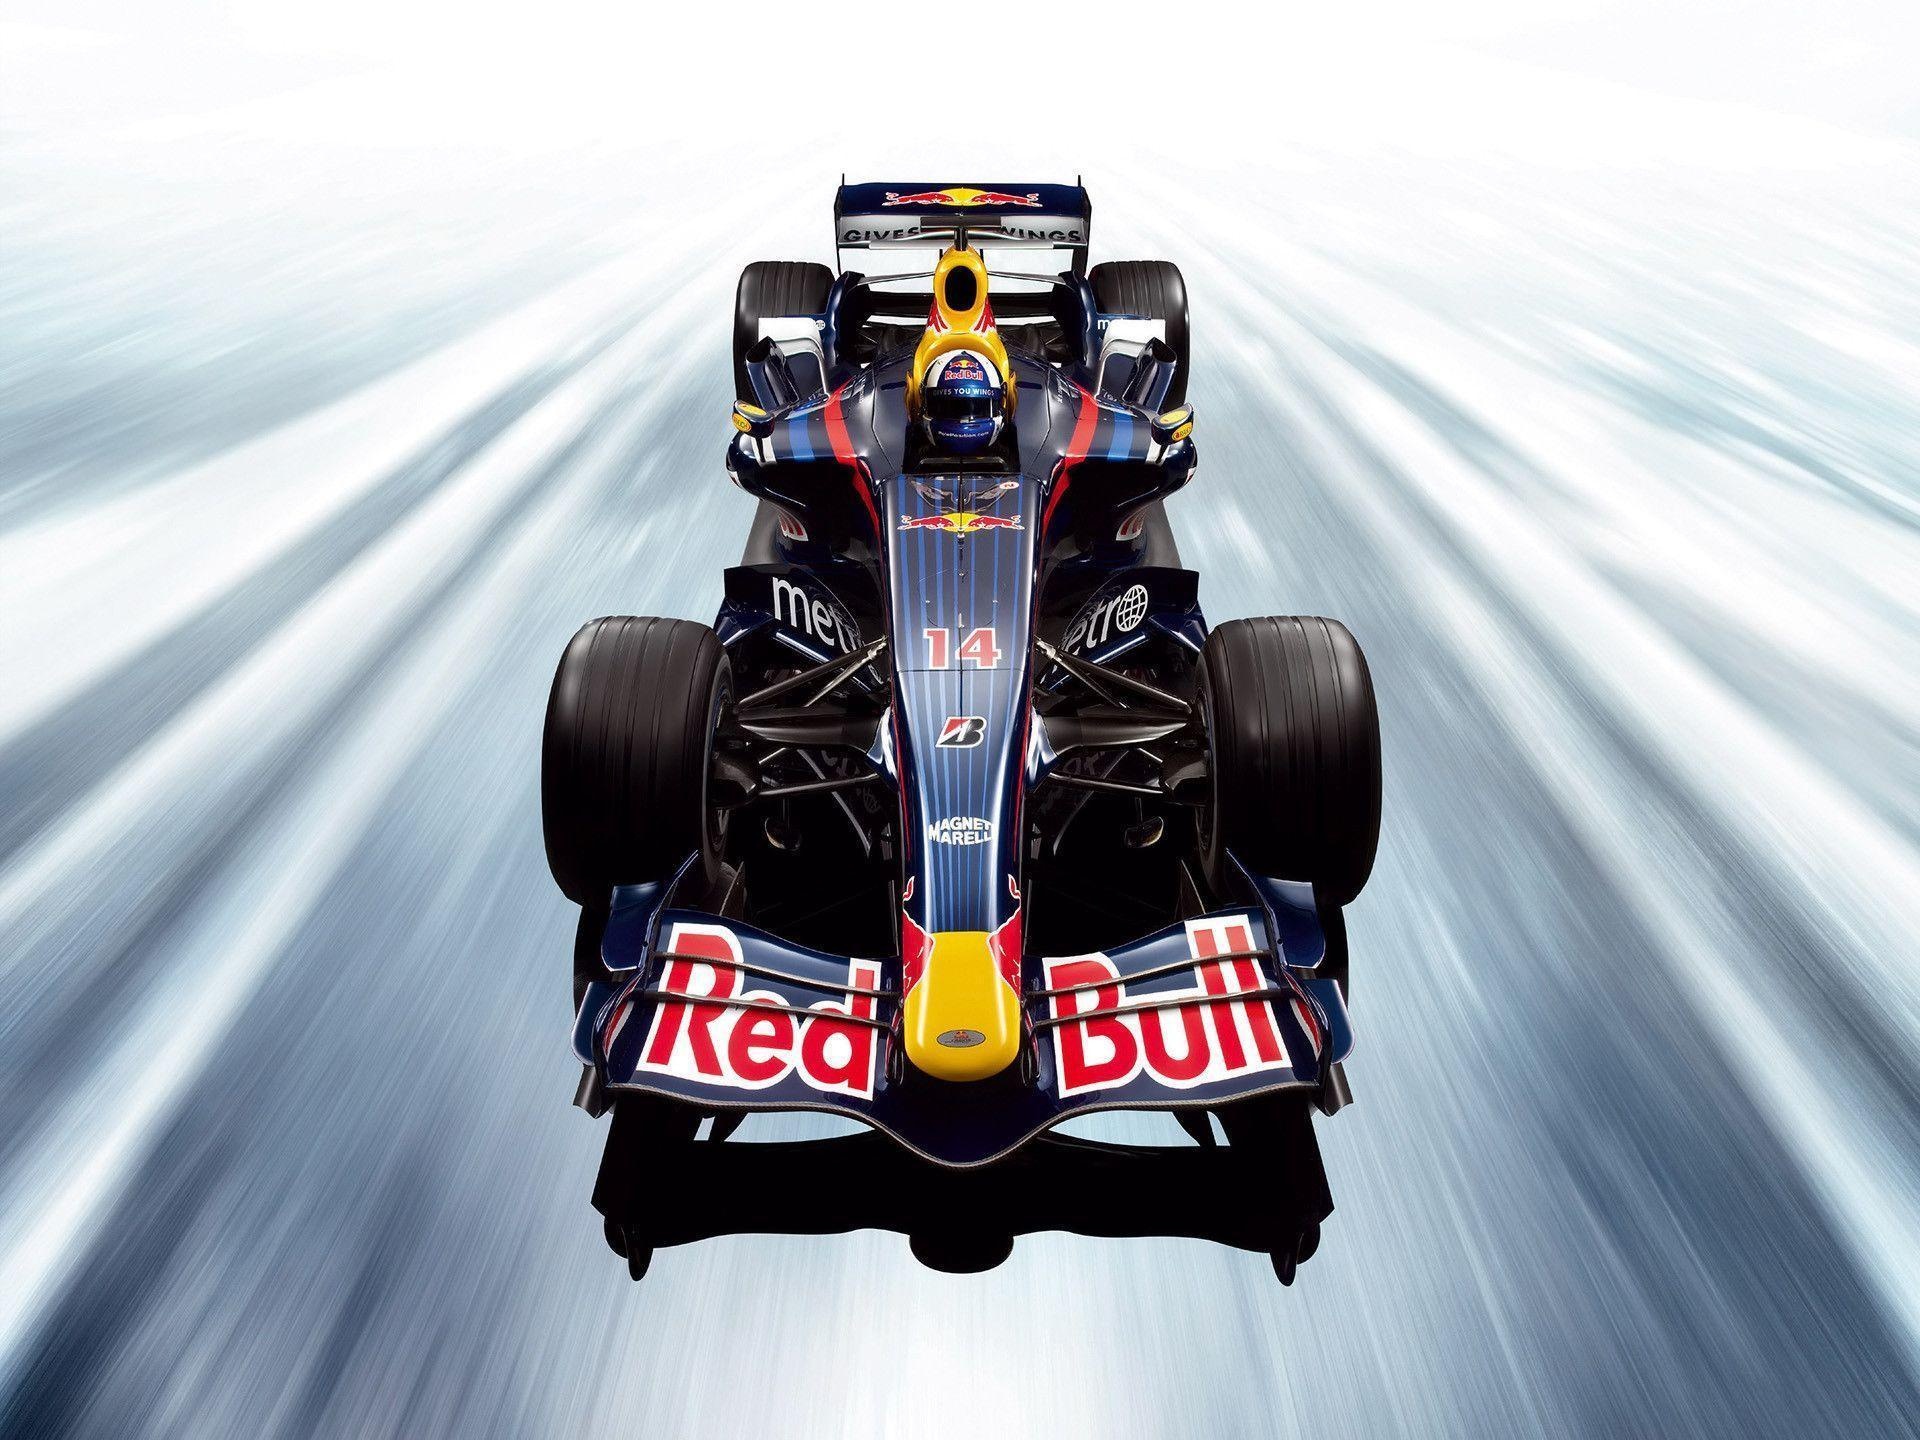 Formula 1: Red Bull Racing, managed by Christian Horner since its formation in 2005. 1920x1440 HD Wallpaper.